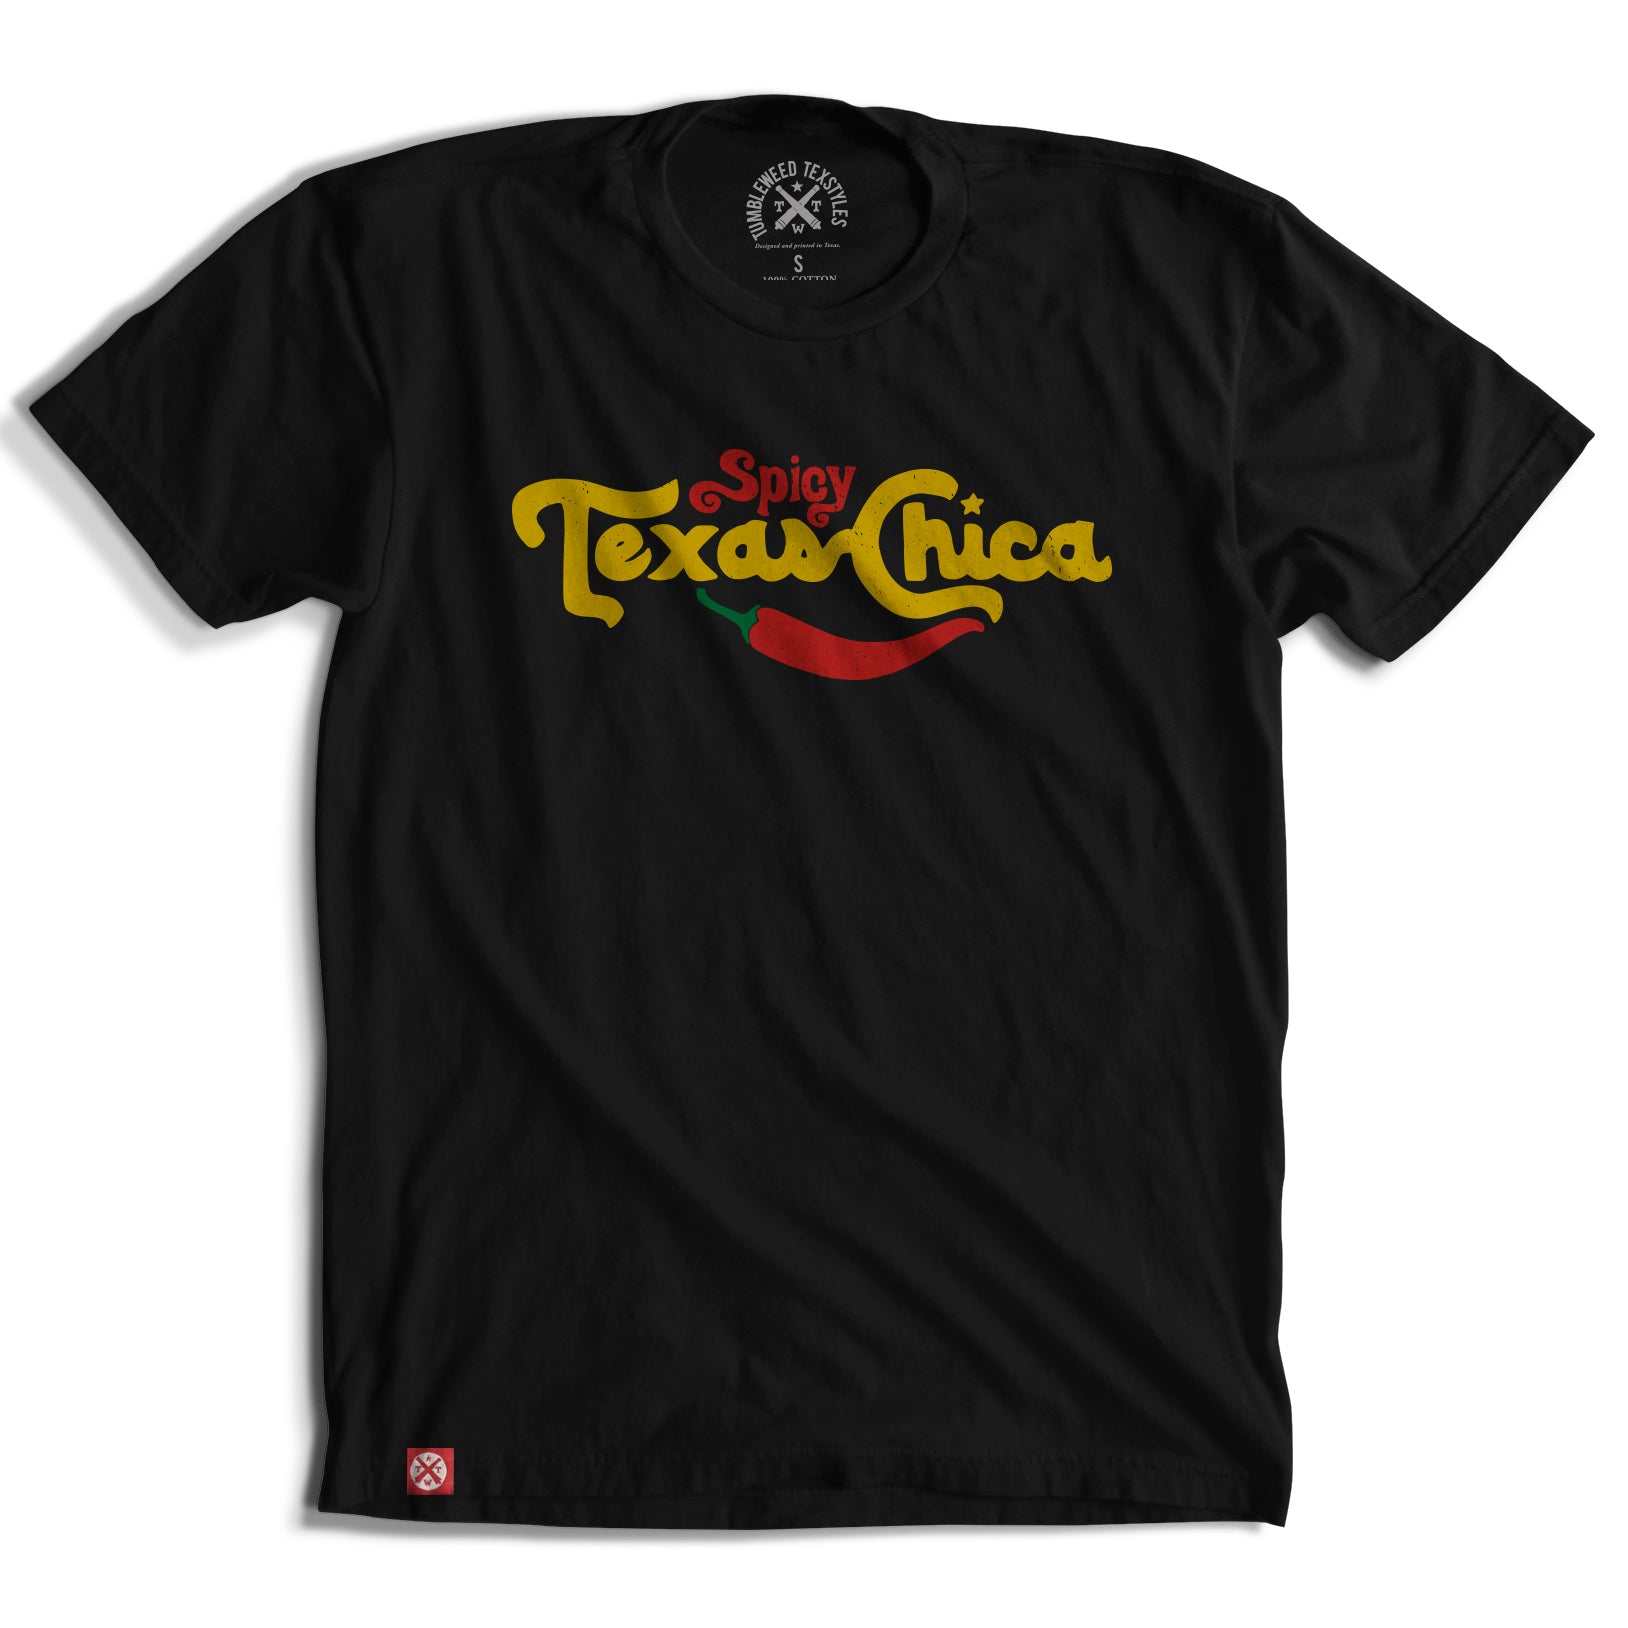 Spicy Texas Chica T-Shirt